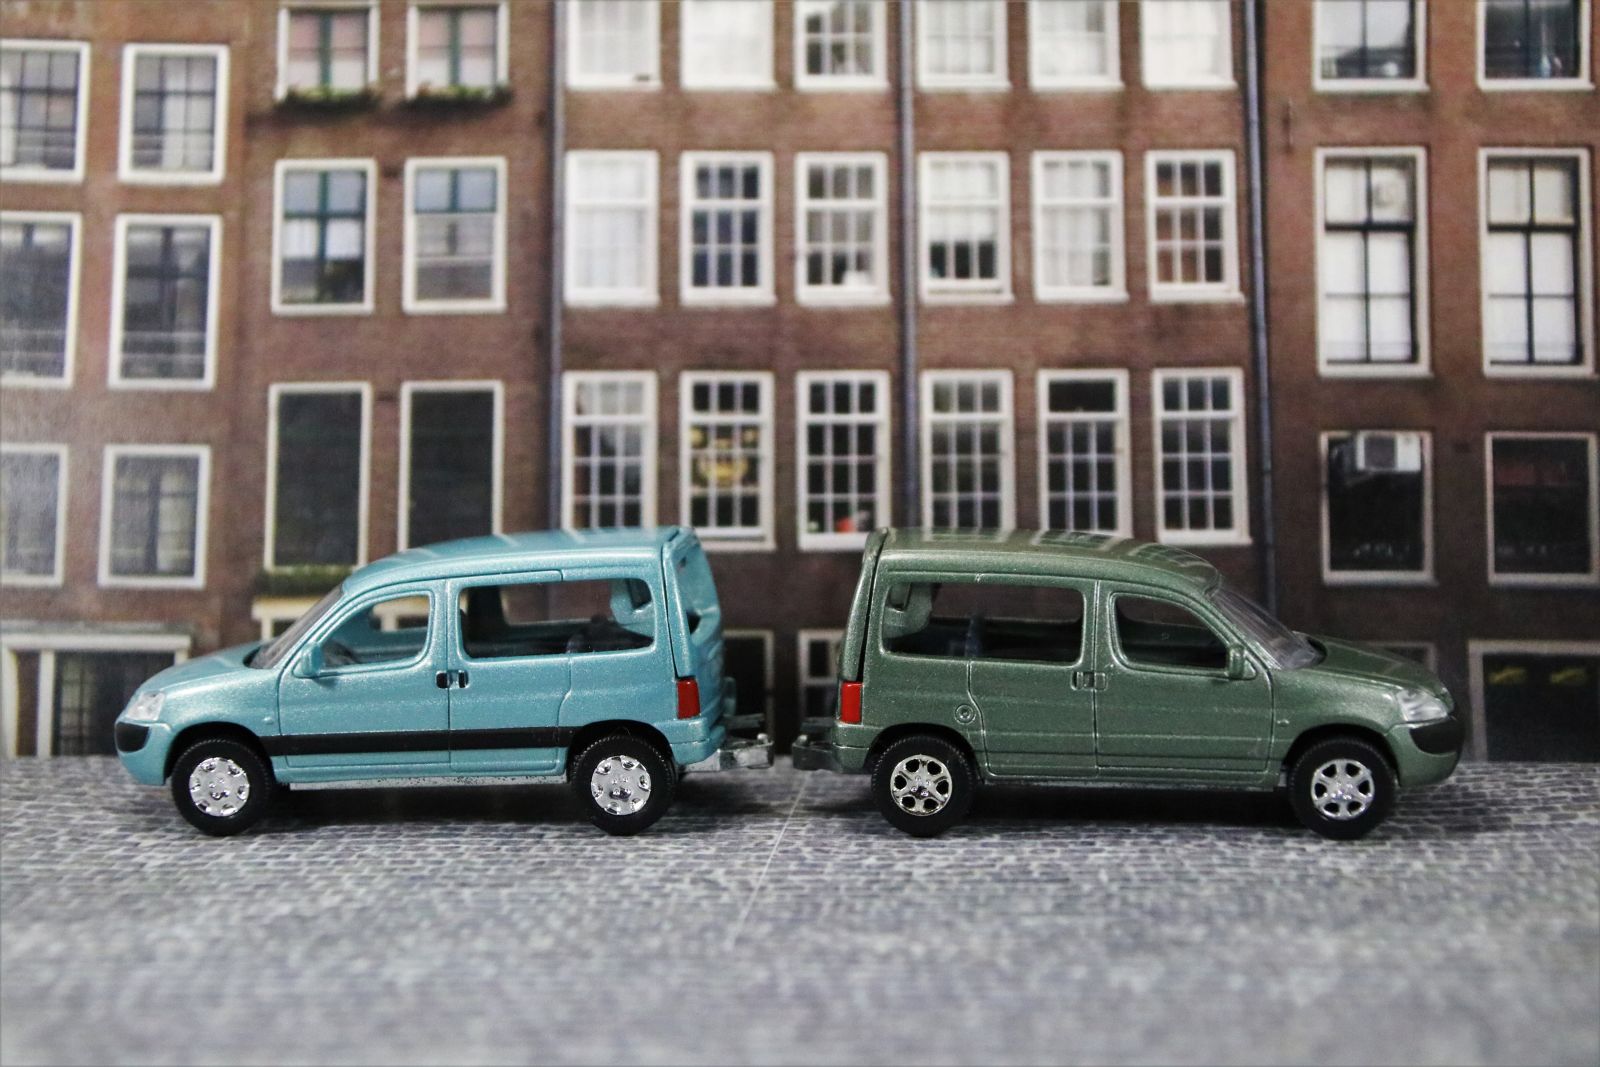 Illustration for article titled French Friday: Partnering with the Berlingo